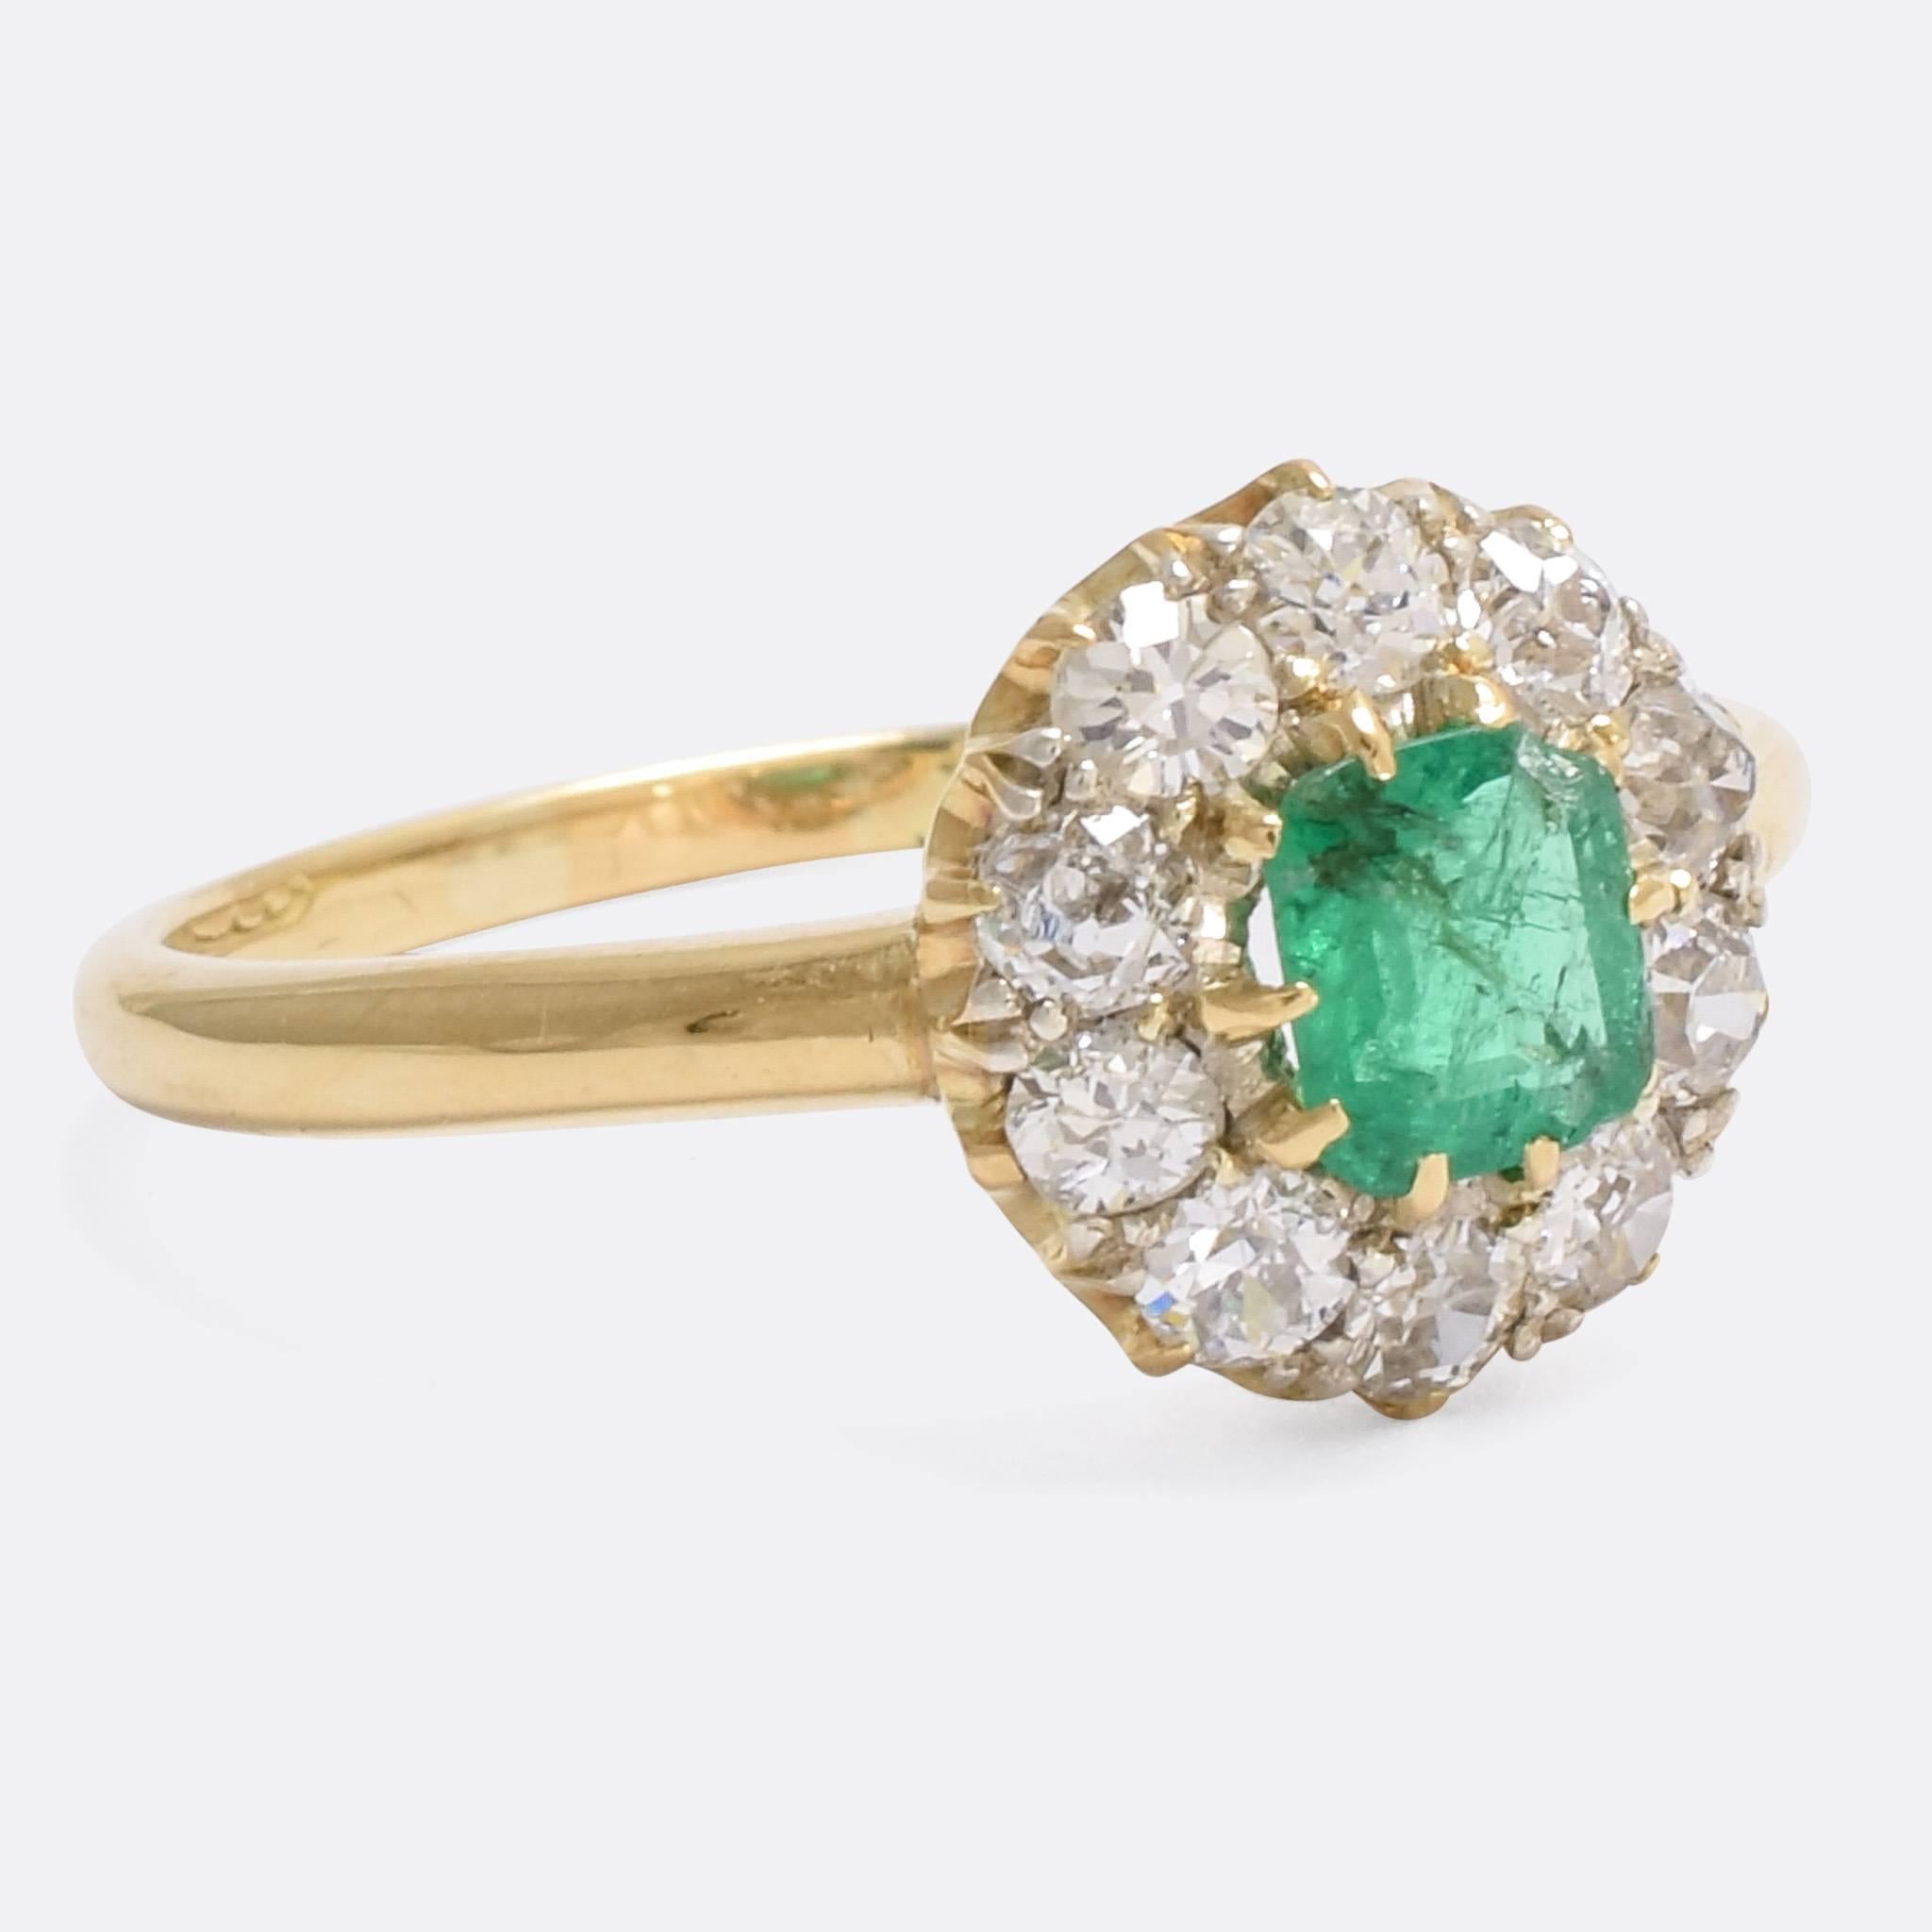 A cool Edwardian period emerald and diamond round cluster ring. The central stone is bursting with colour, resting within a .70ct cluster of bright old cut diamonds. The ring is modelled in 15 karat gold, and the diamonds are set in platinum-tipped